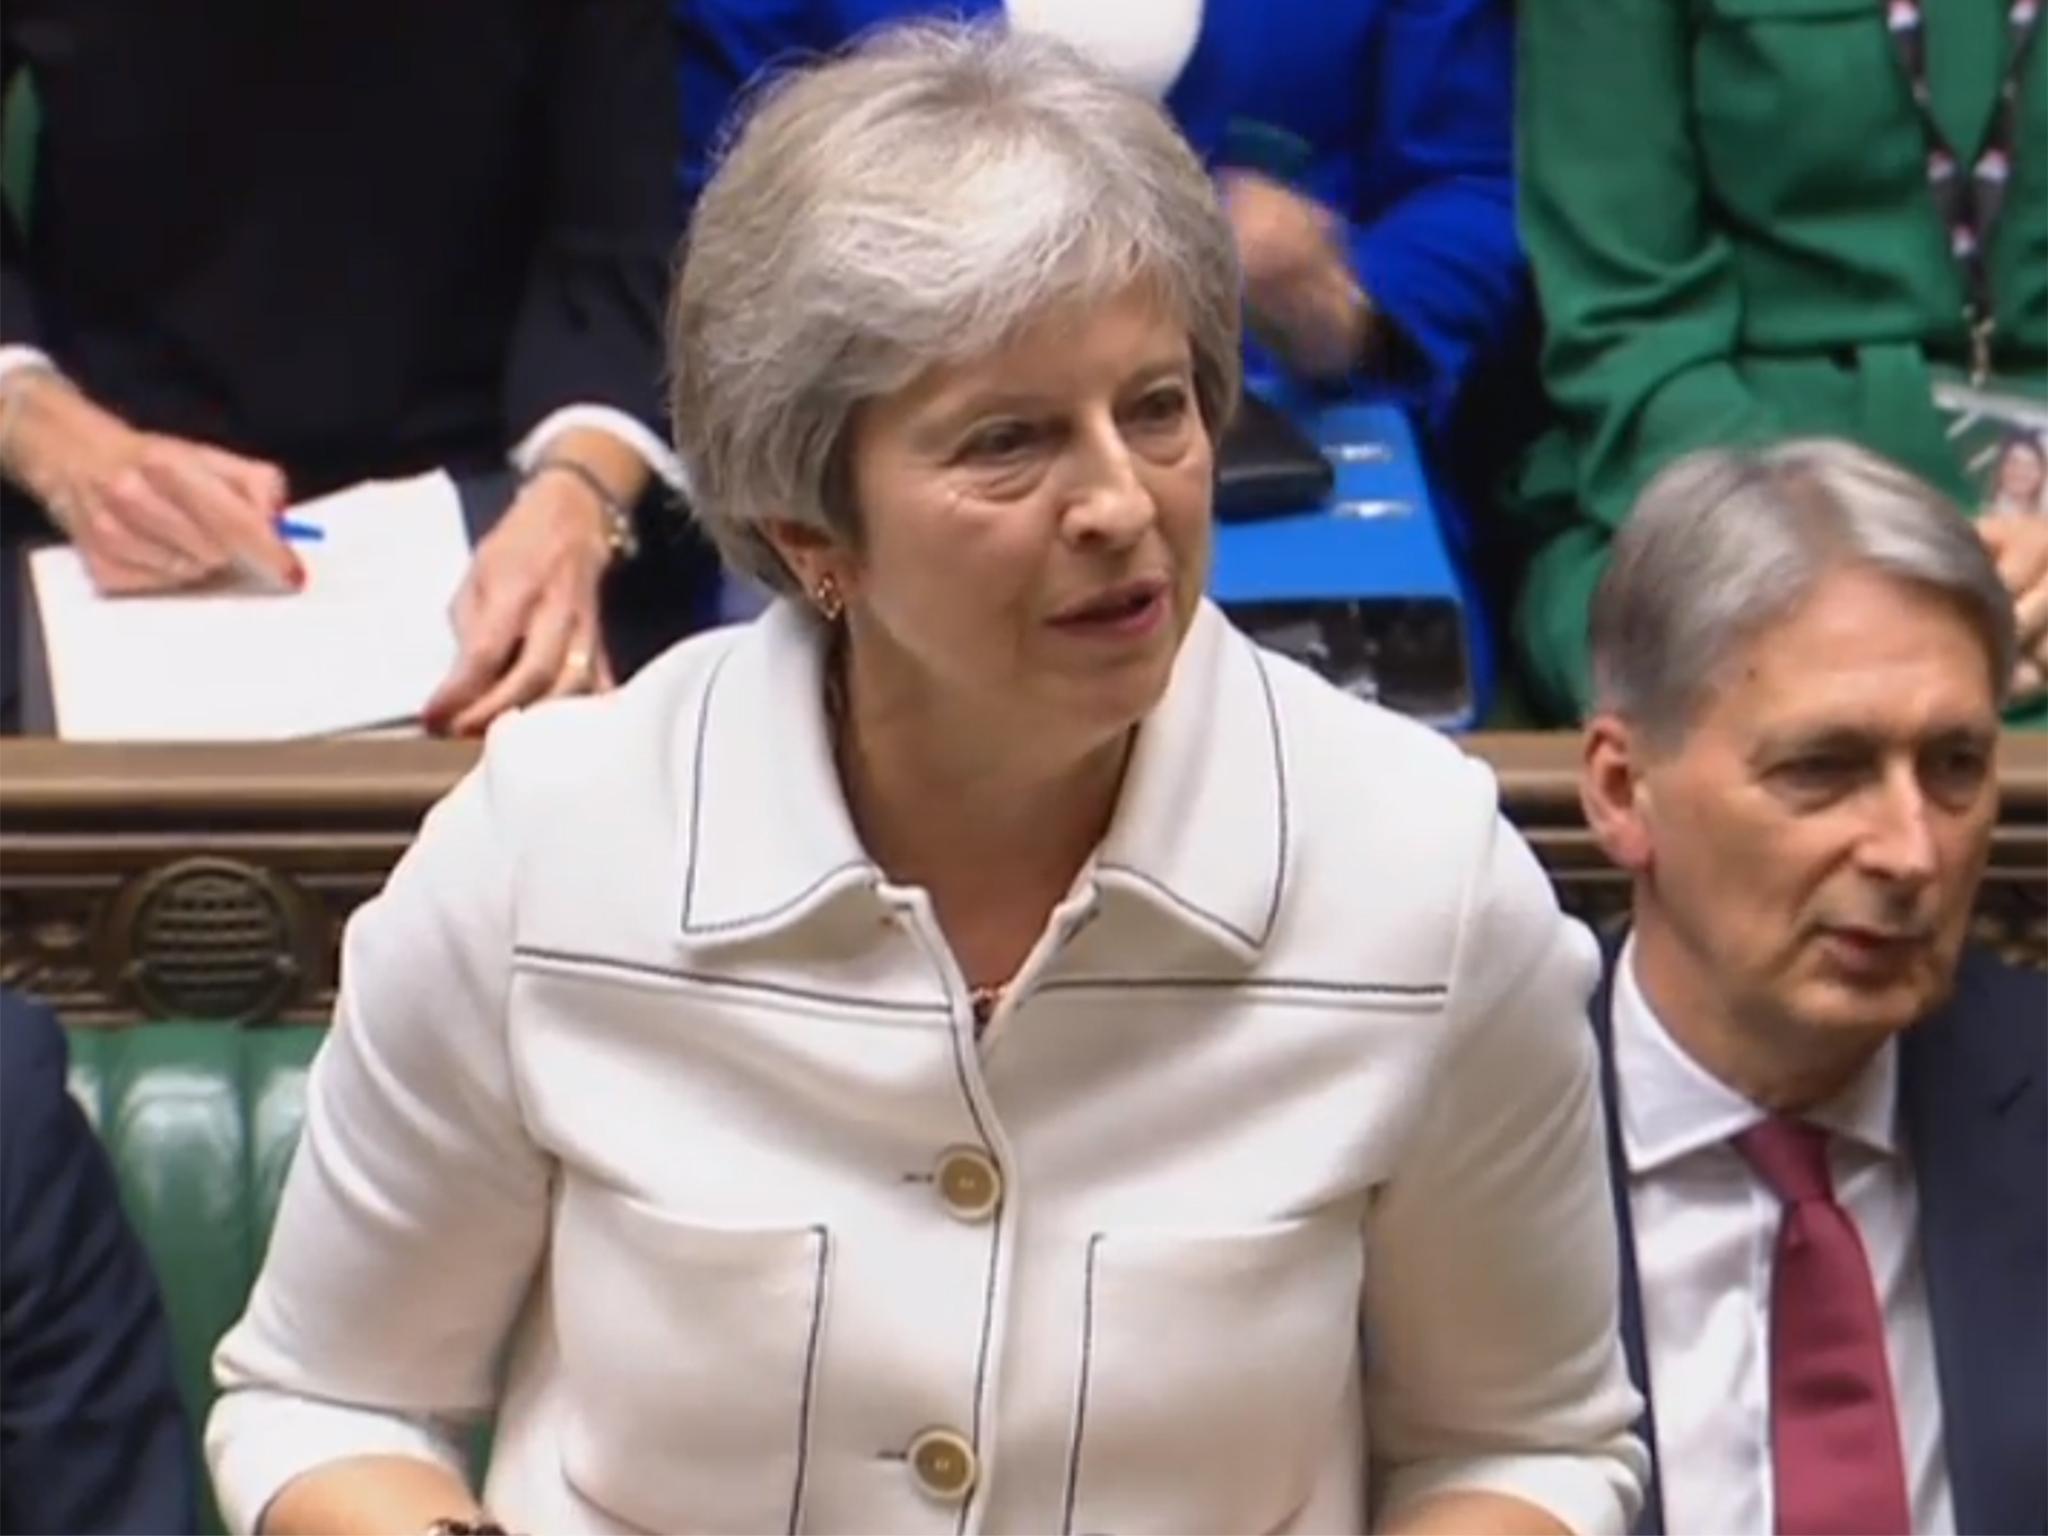 Brexit news: Theresa May gives statement to MPs after Brussels talks hit deadlock